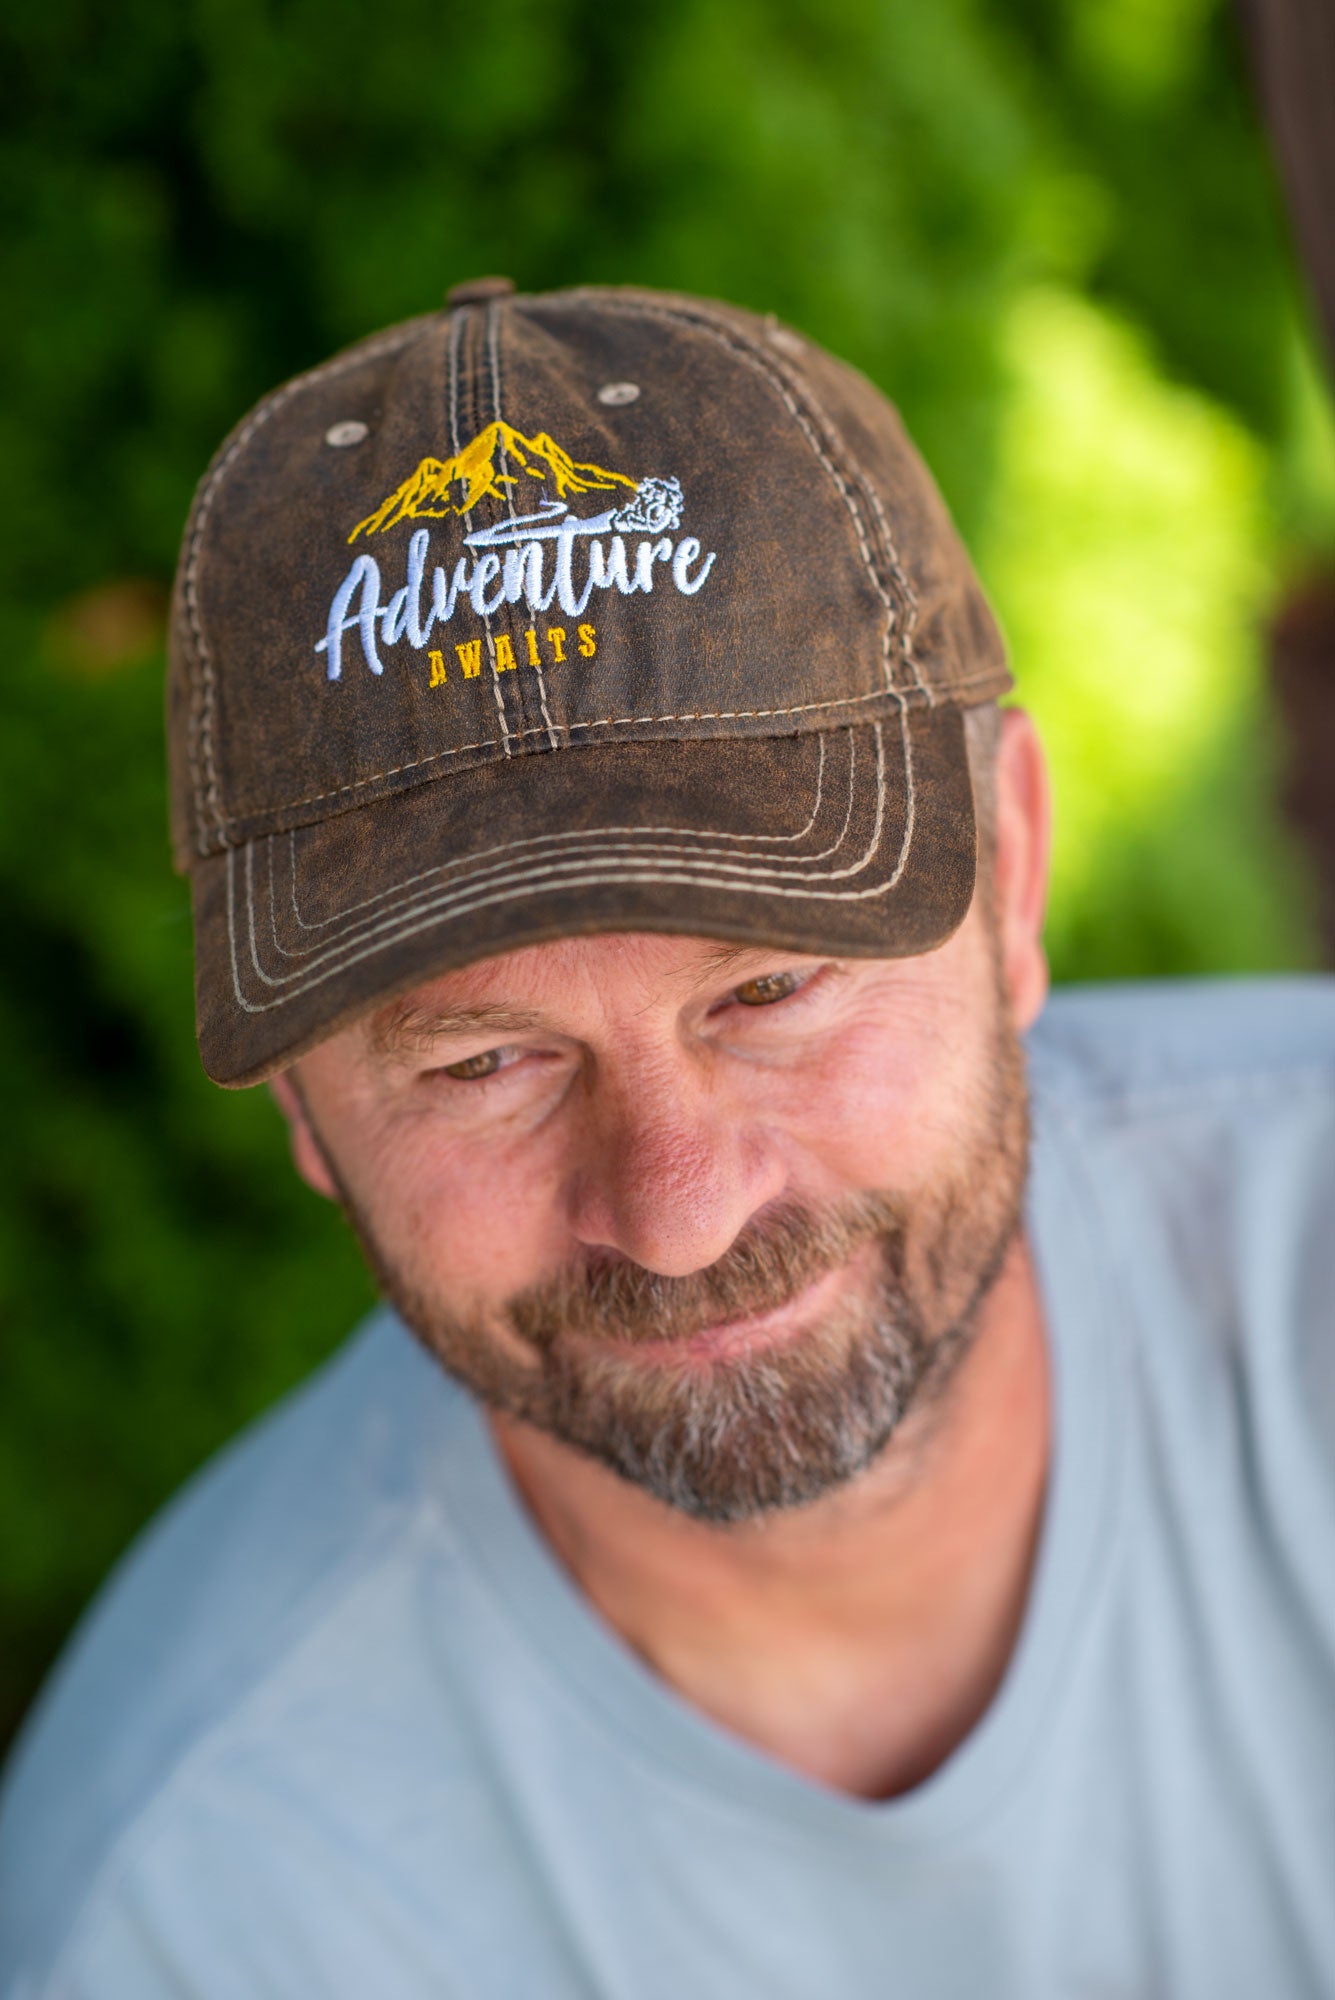 Adventure Awaits - Oiled Canvas - Charcoal or Brown - Baseball Style Hat